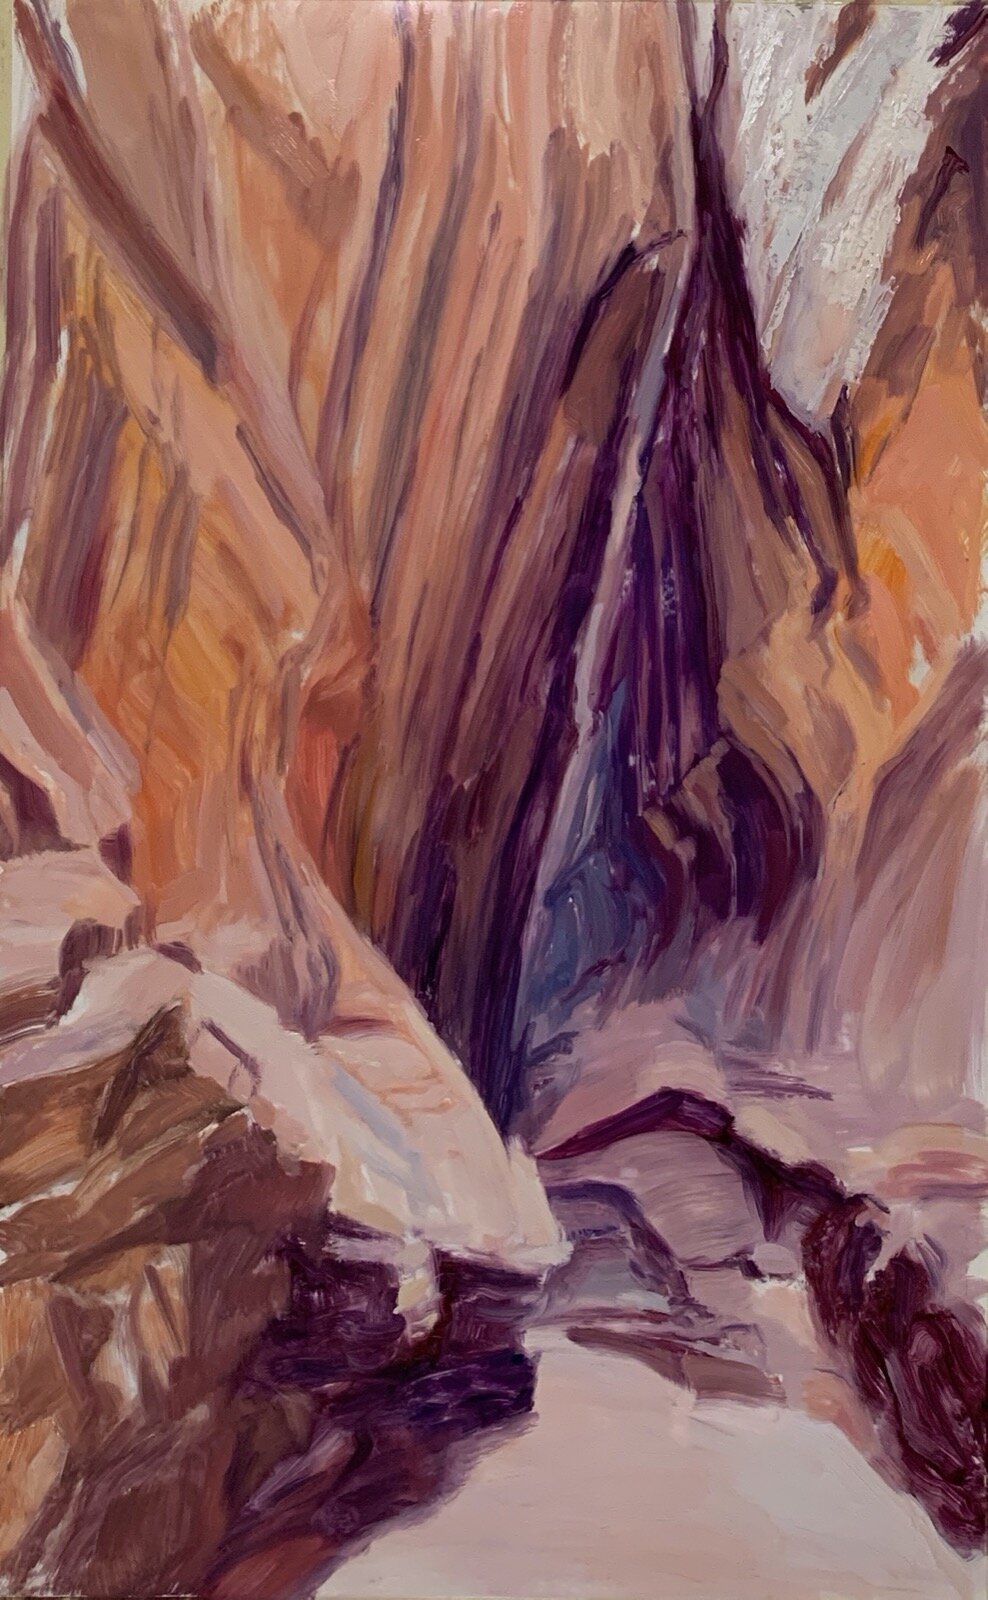   Singing Canyon , 2020 oil on dura-lar, 40 x 25 in 